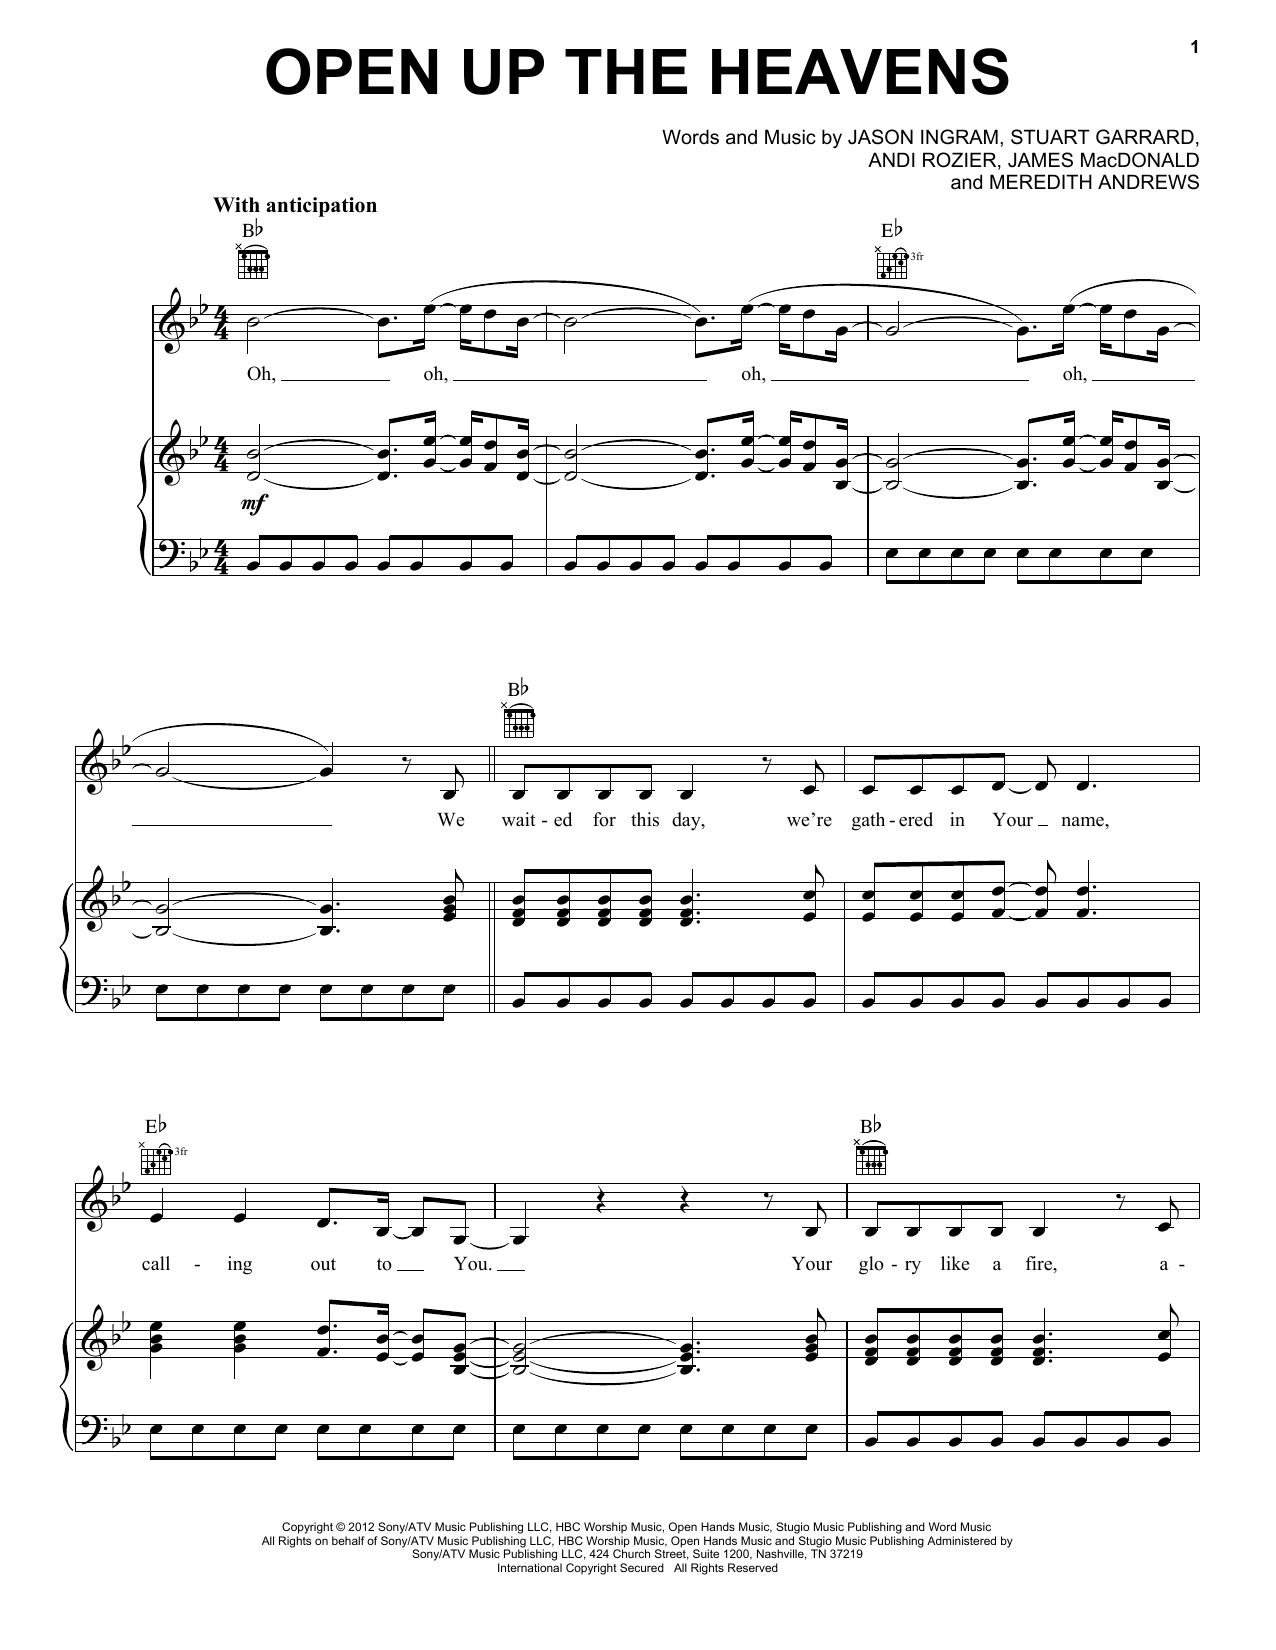 Download Meredith Andrews Open Up The Heavens Sheet Music